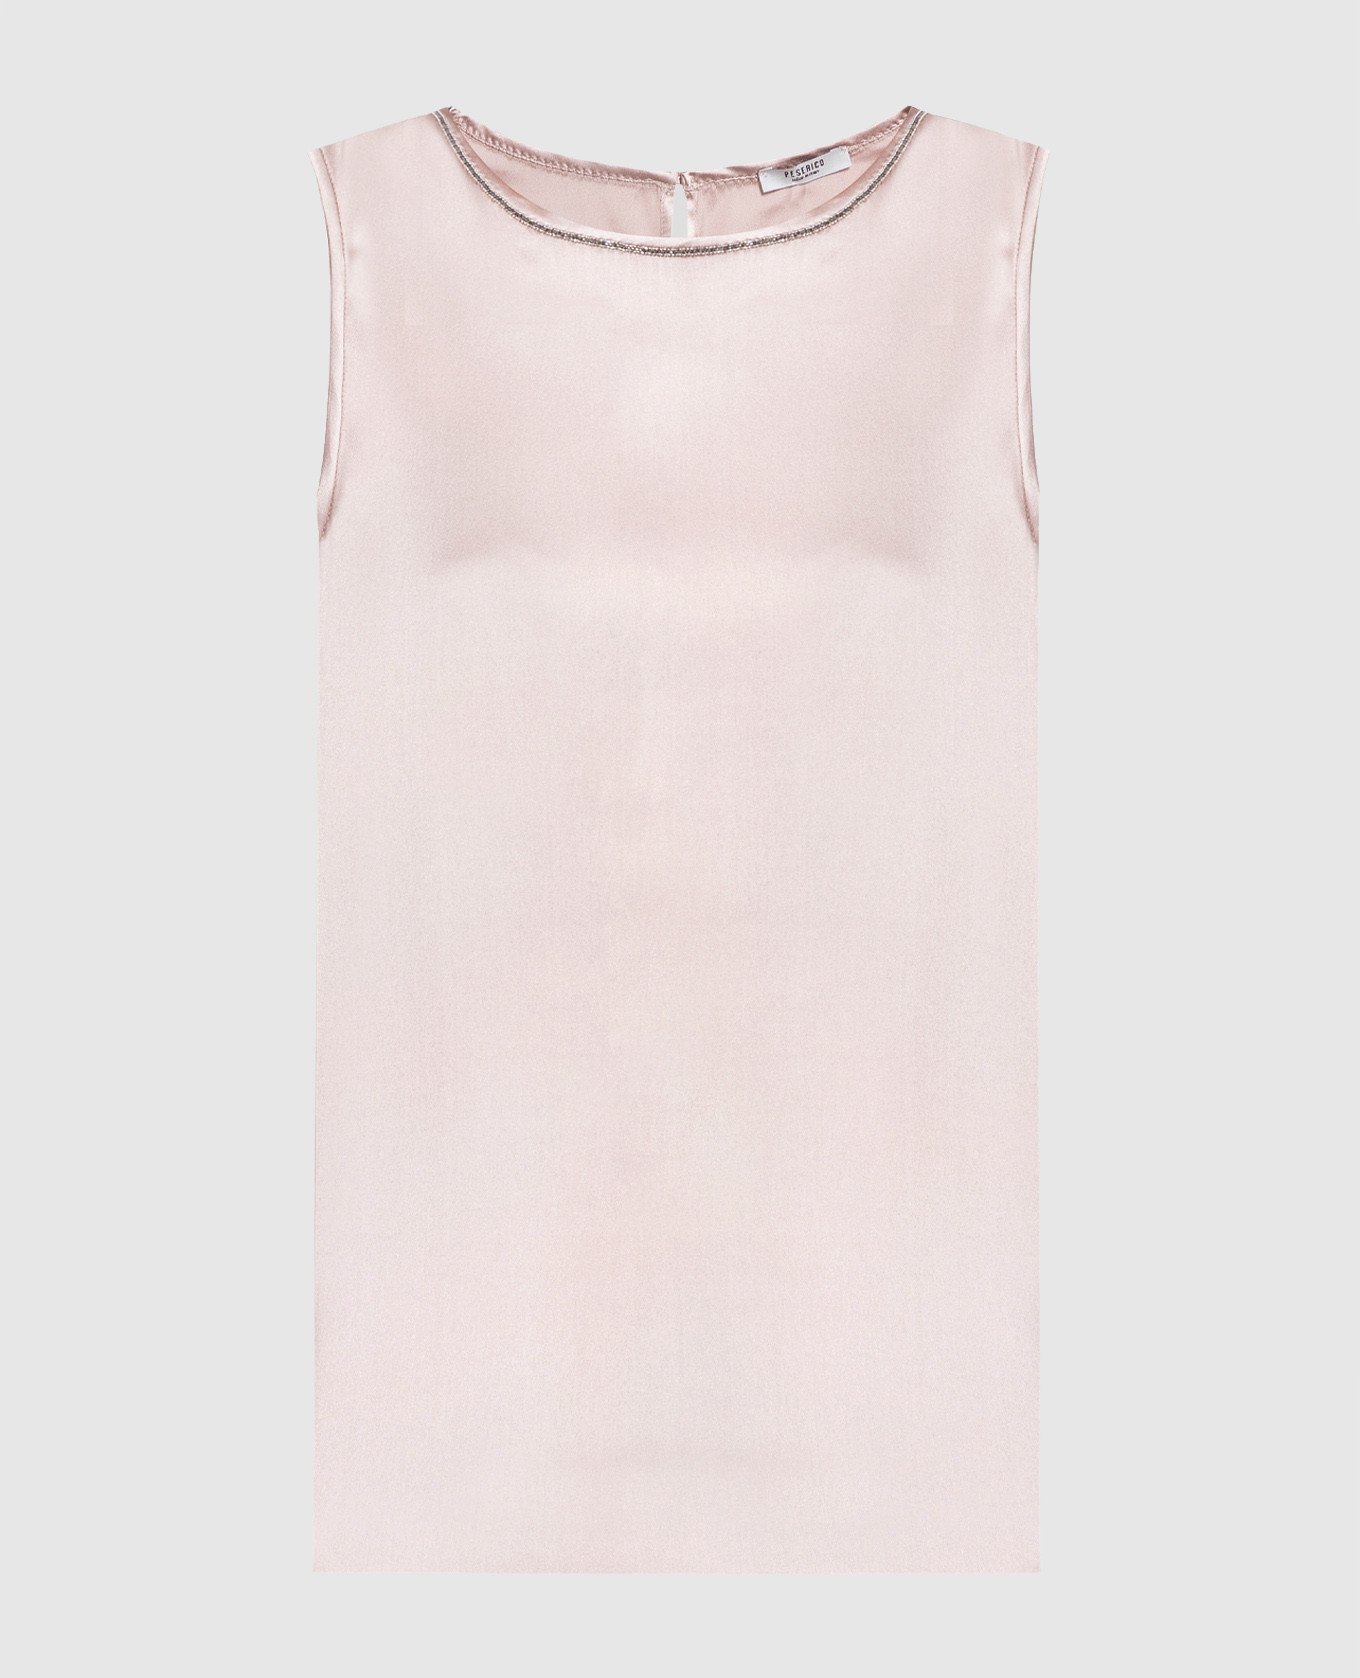 Pink silk top with monil chain